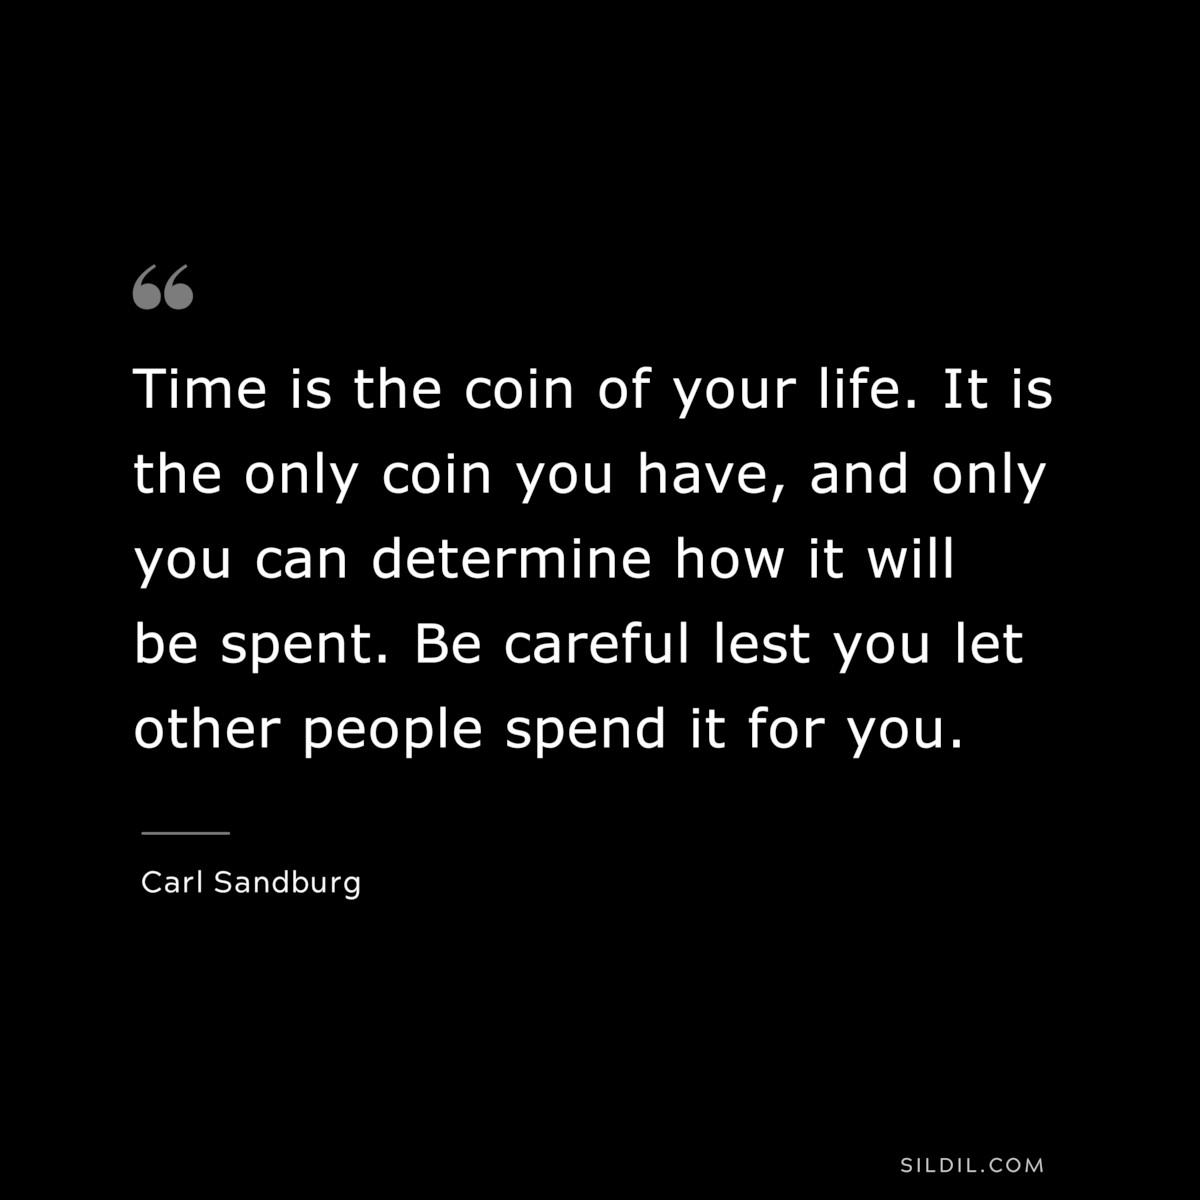 Time is the coin of your life. It is the only coin you have, and only you can determine how it will be spent. Be careful lest you let other people spend it for you. ― Carl Sandburg